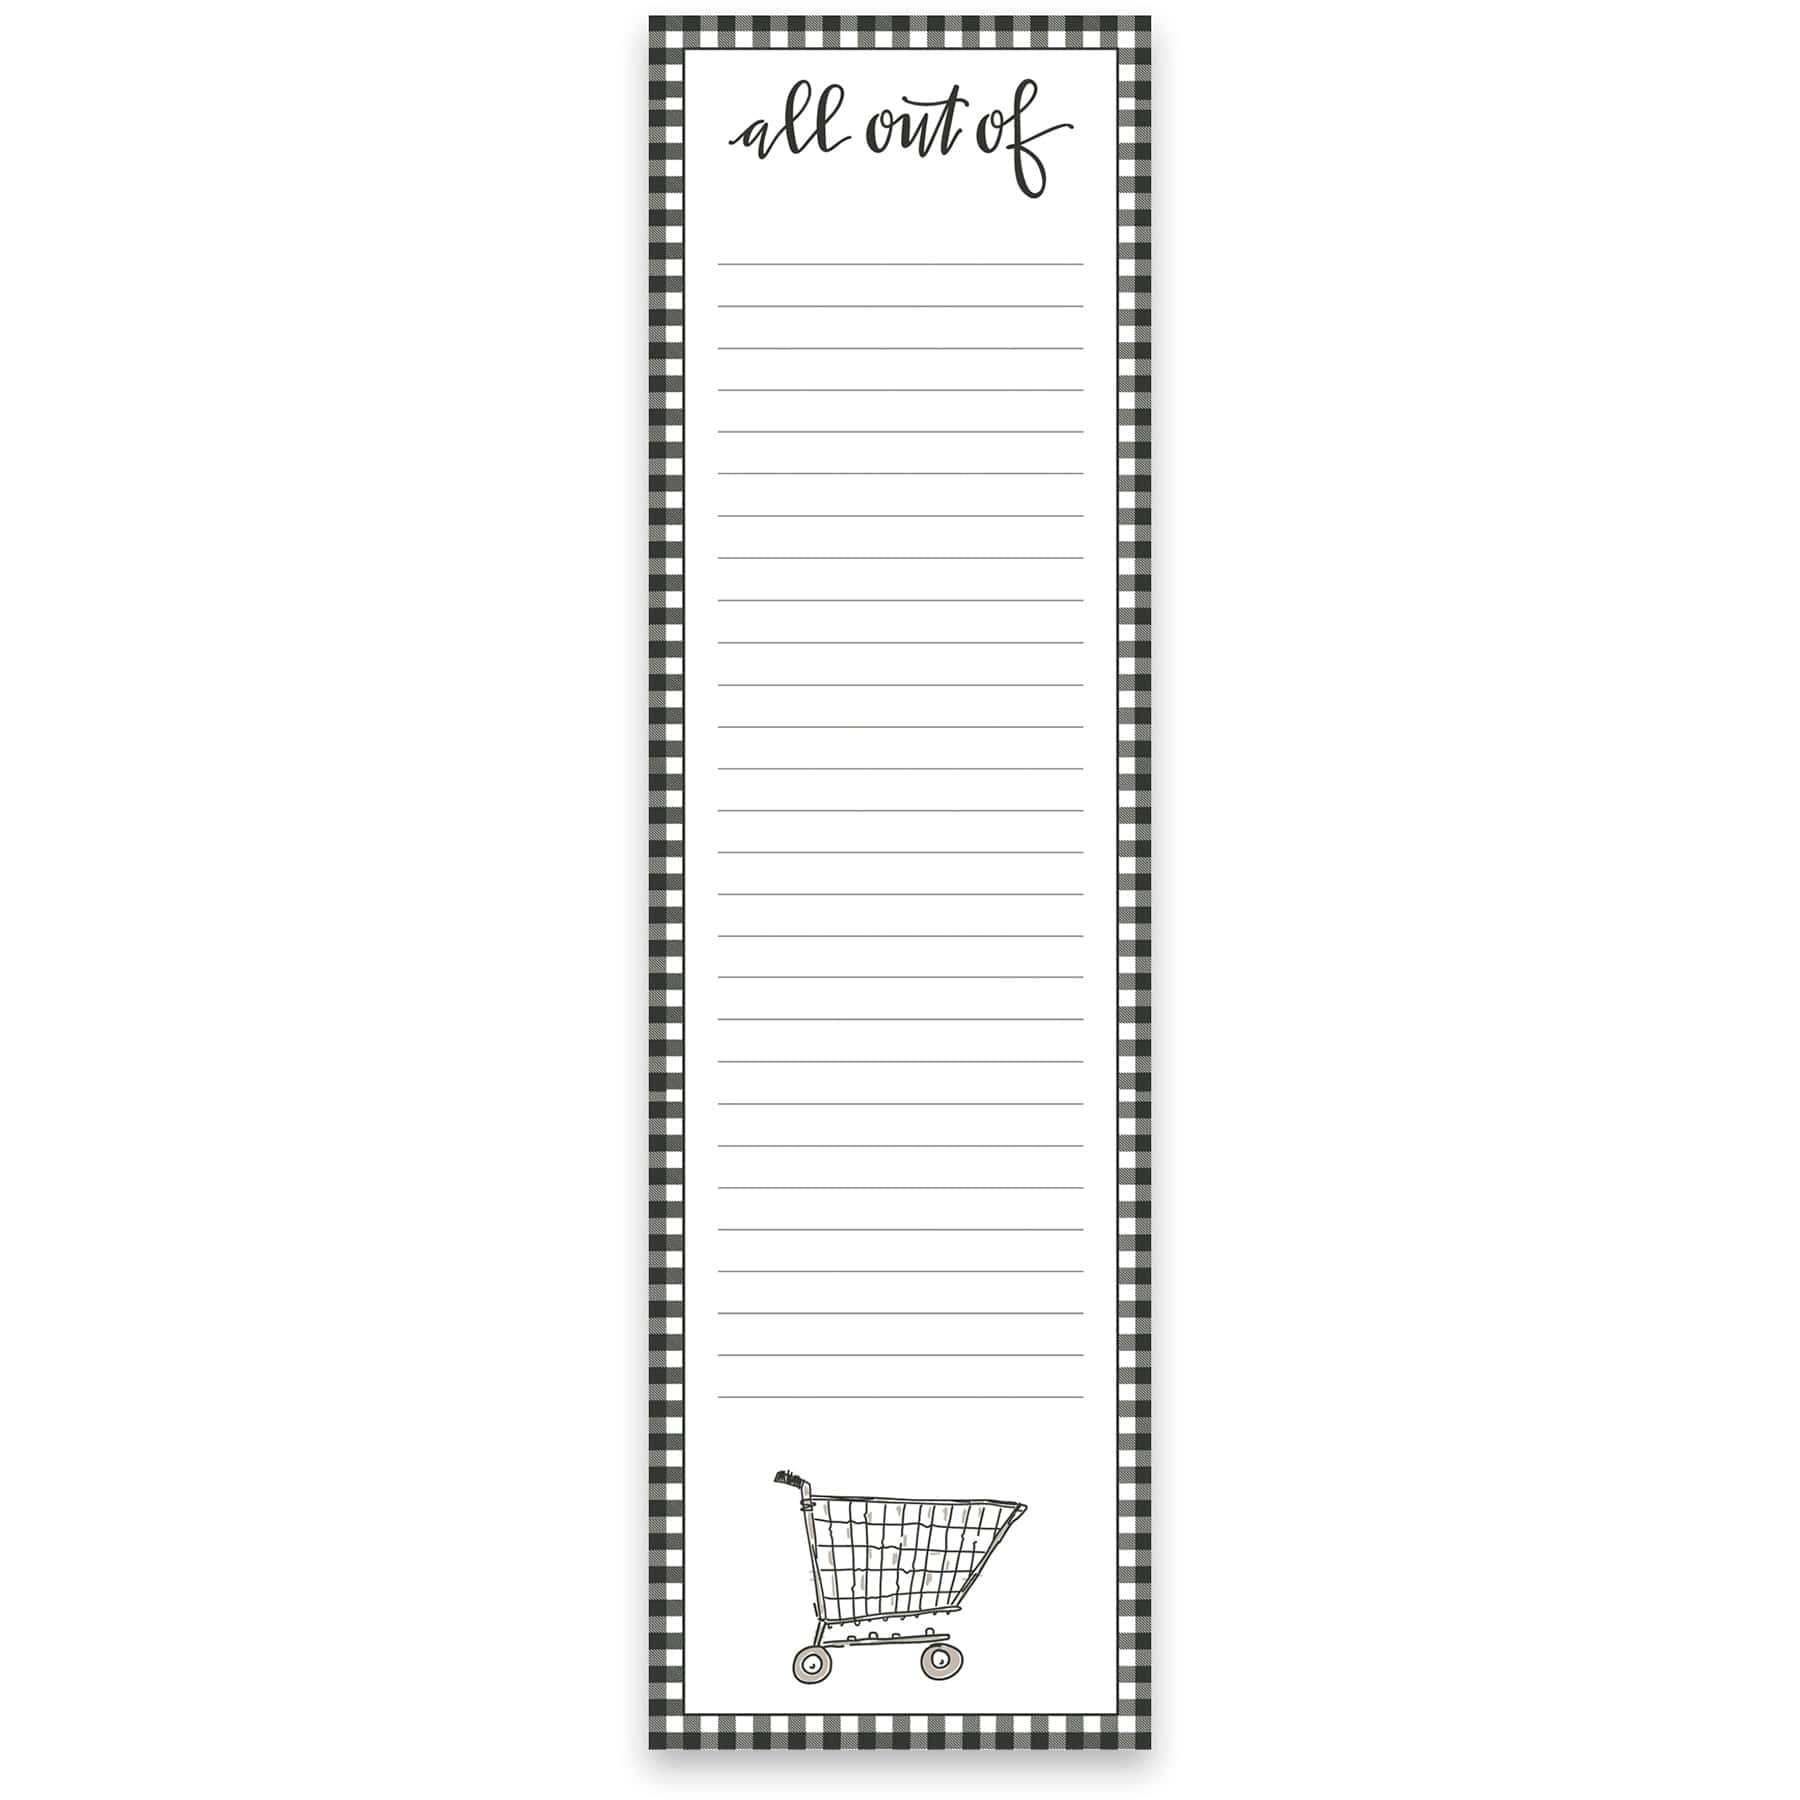 Stationery List Notepad - All Out Of PBK - 106749